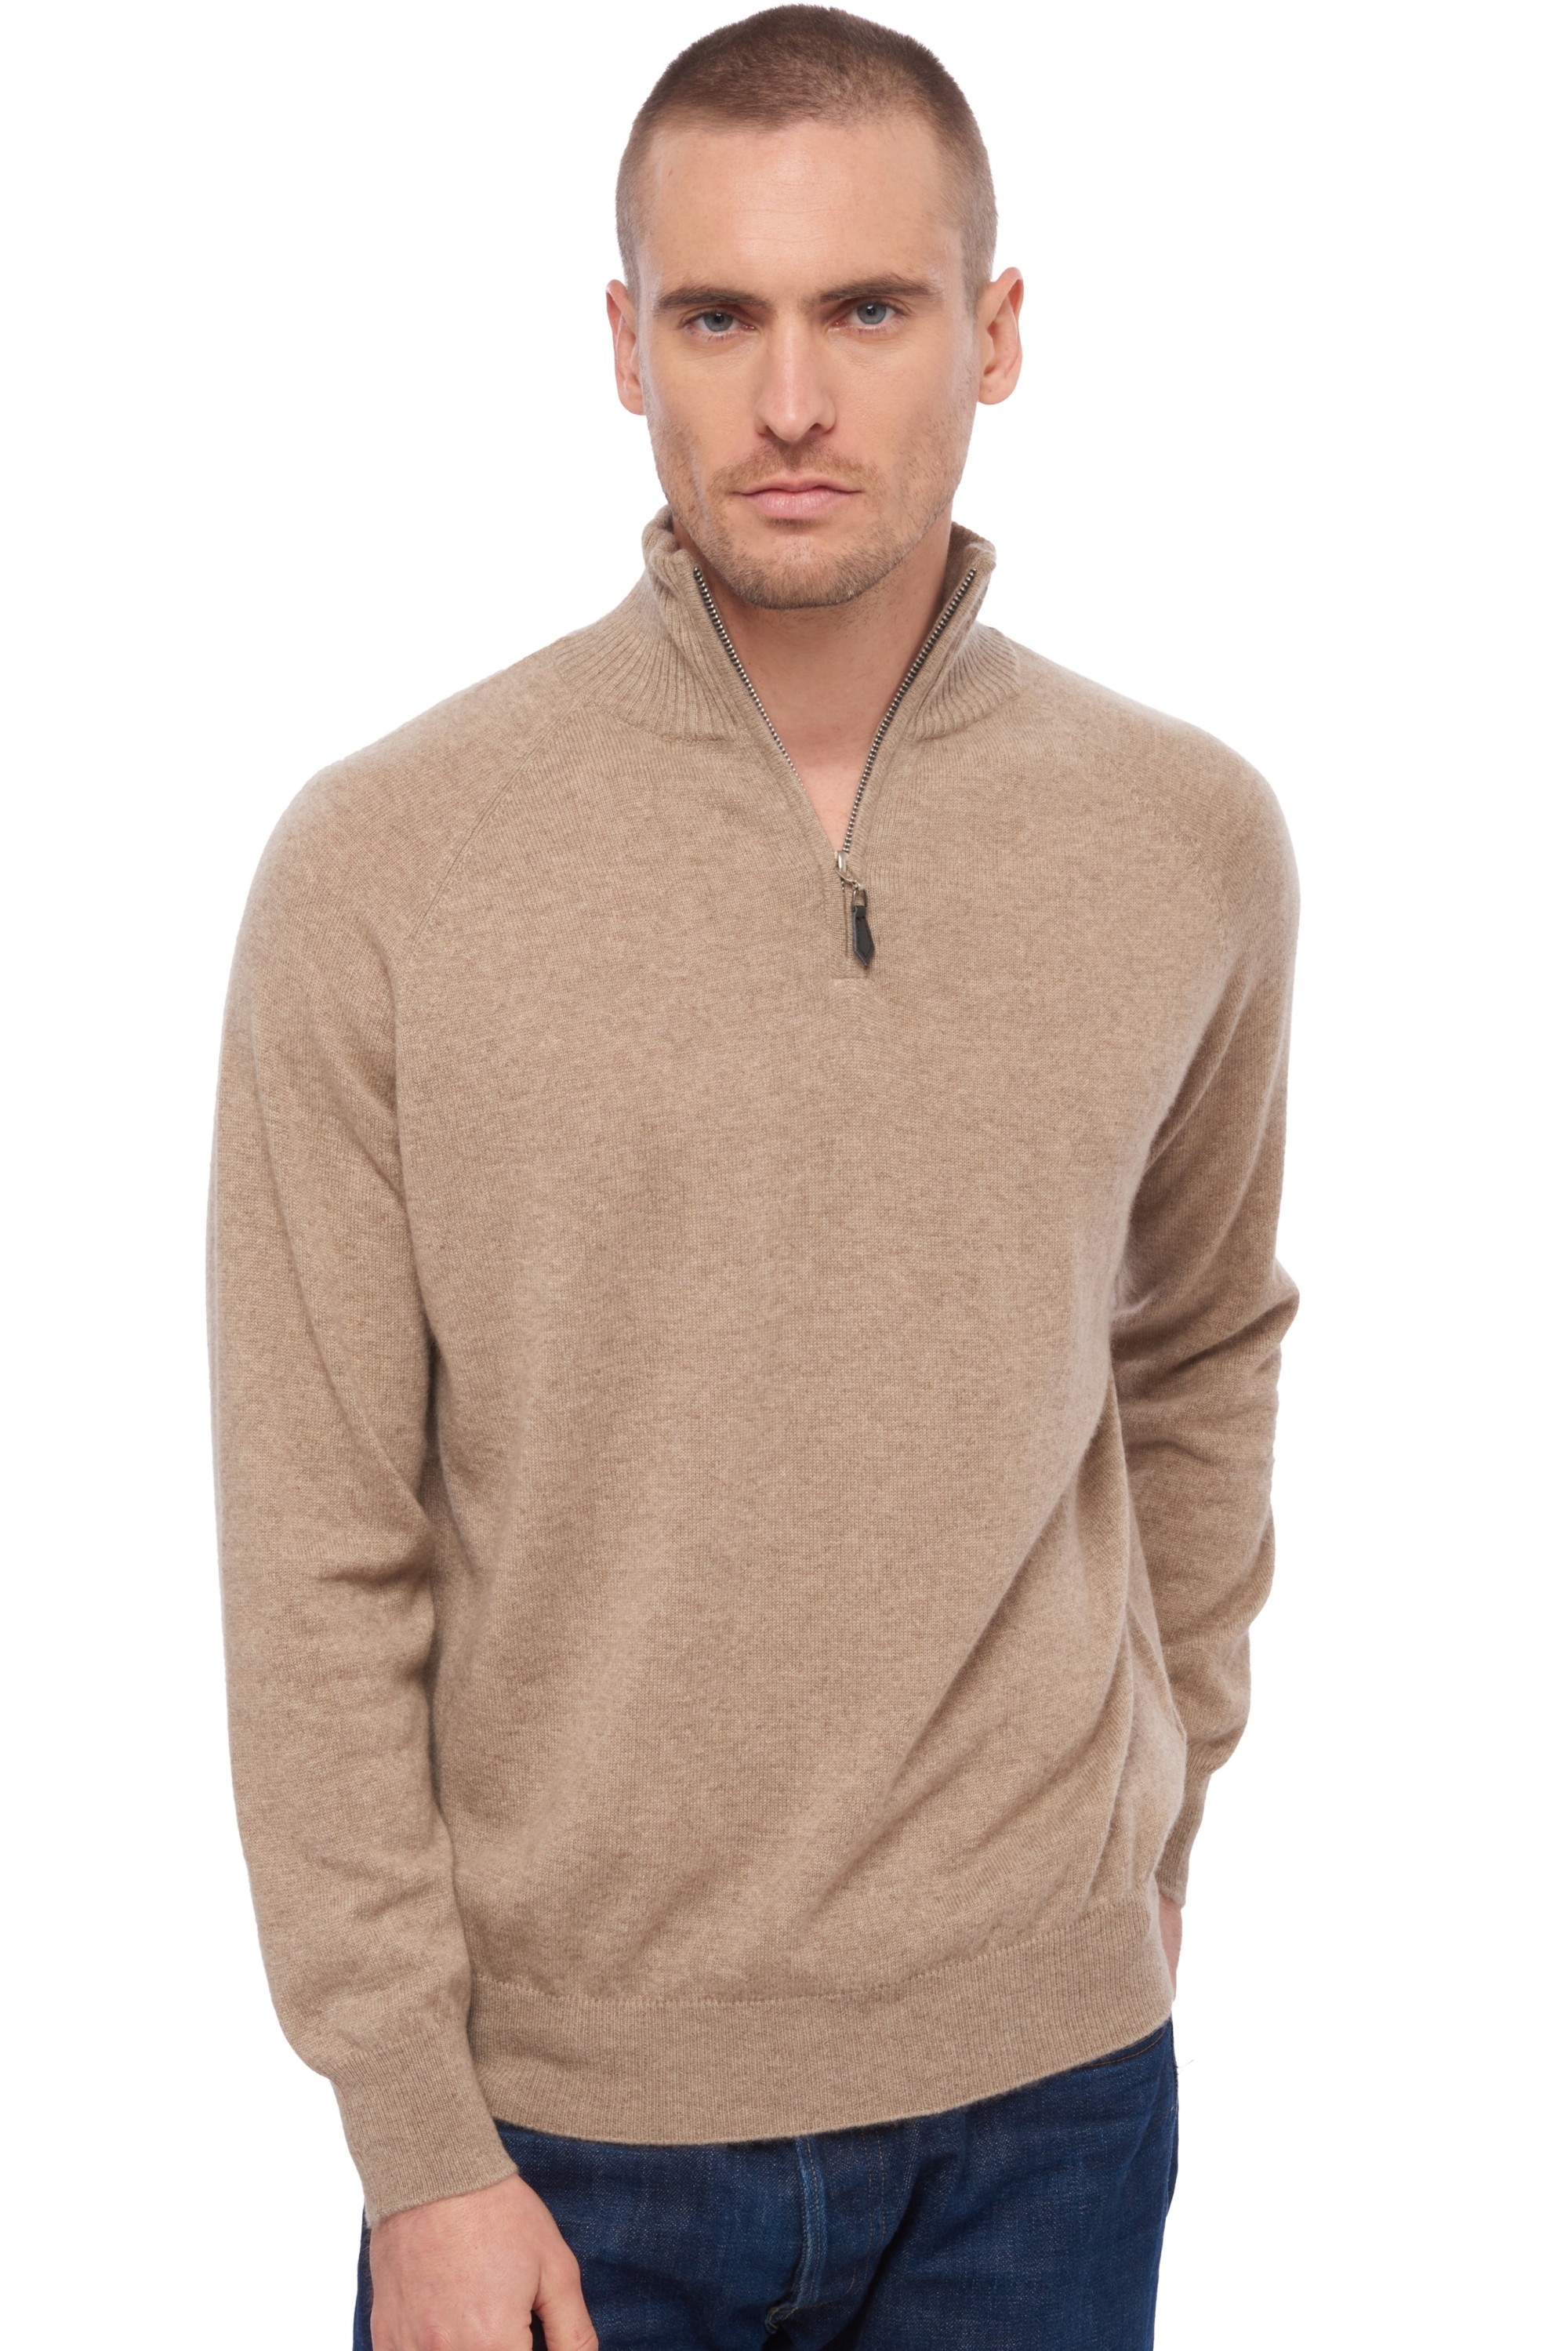 Cachemire pull homme natural vez natural brown 2xl